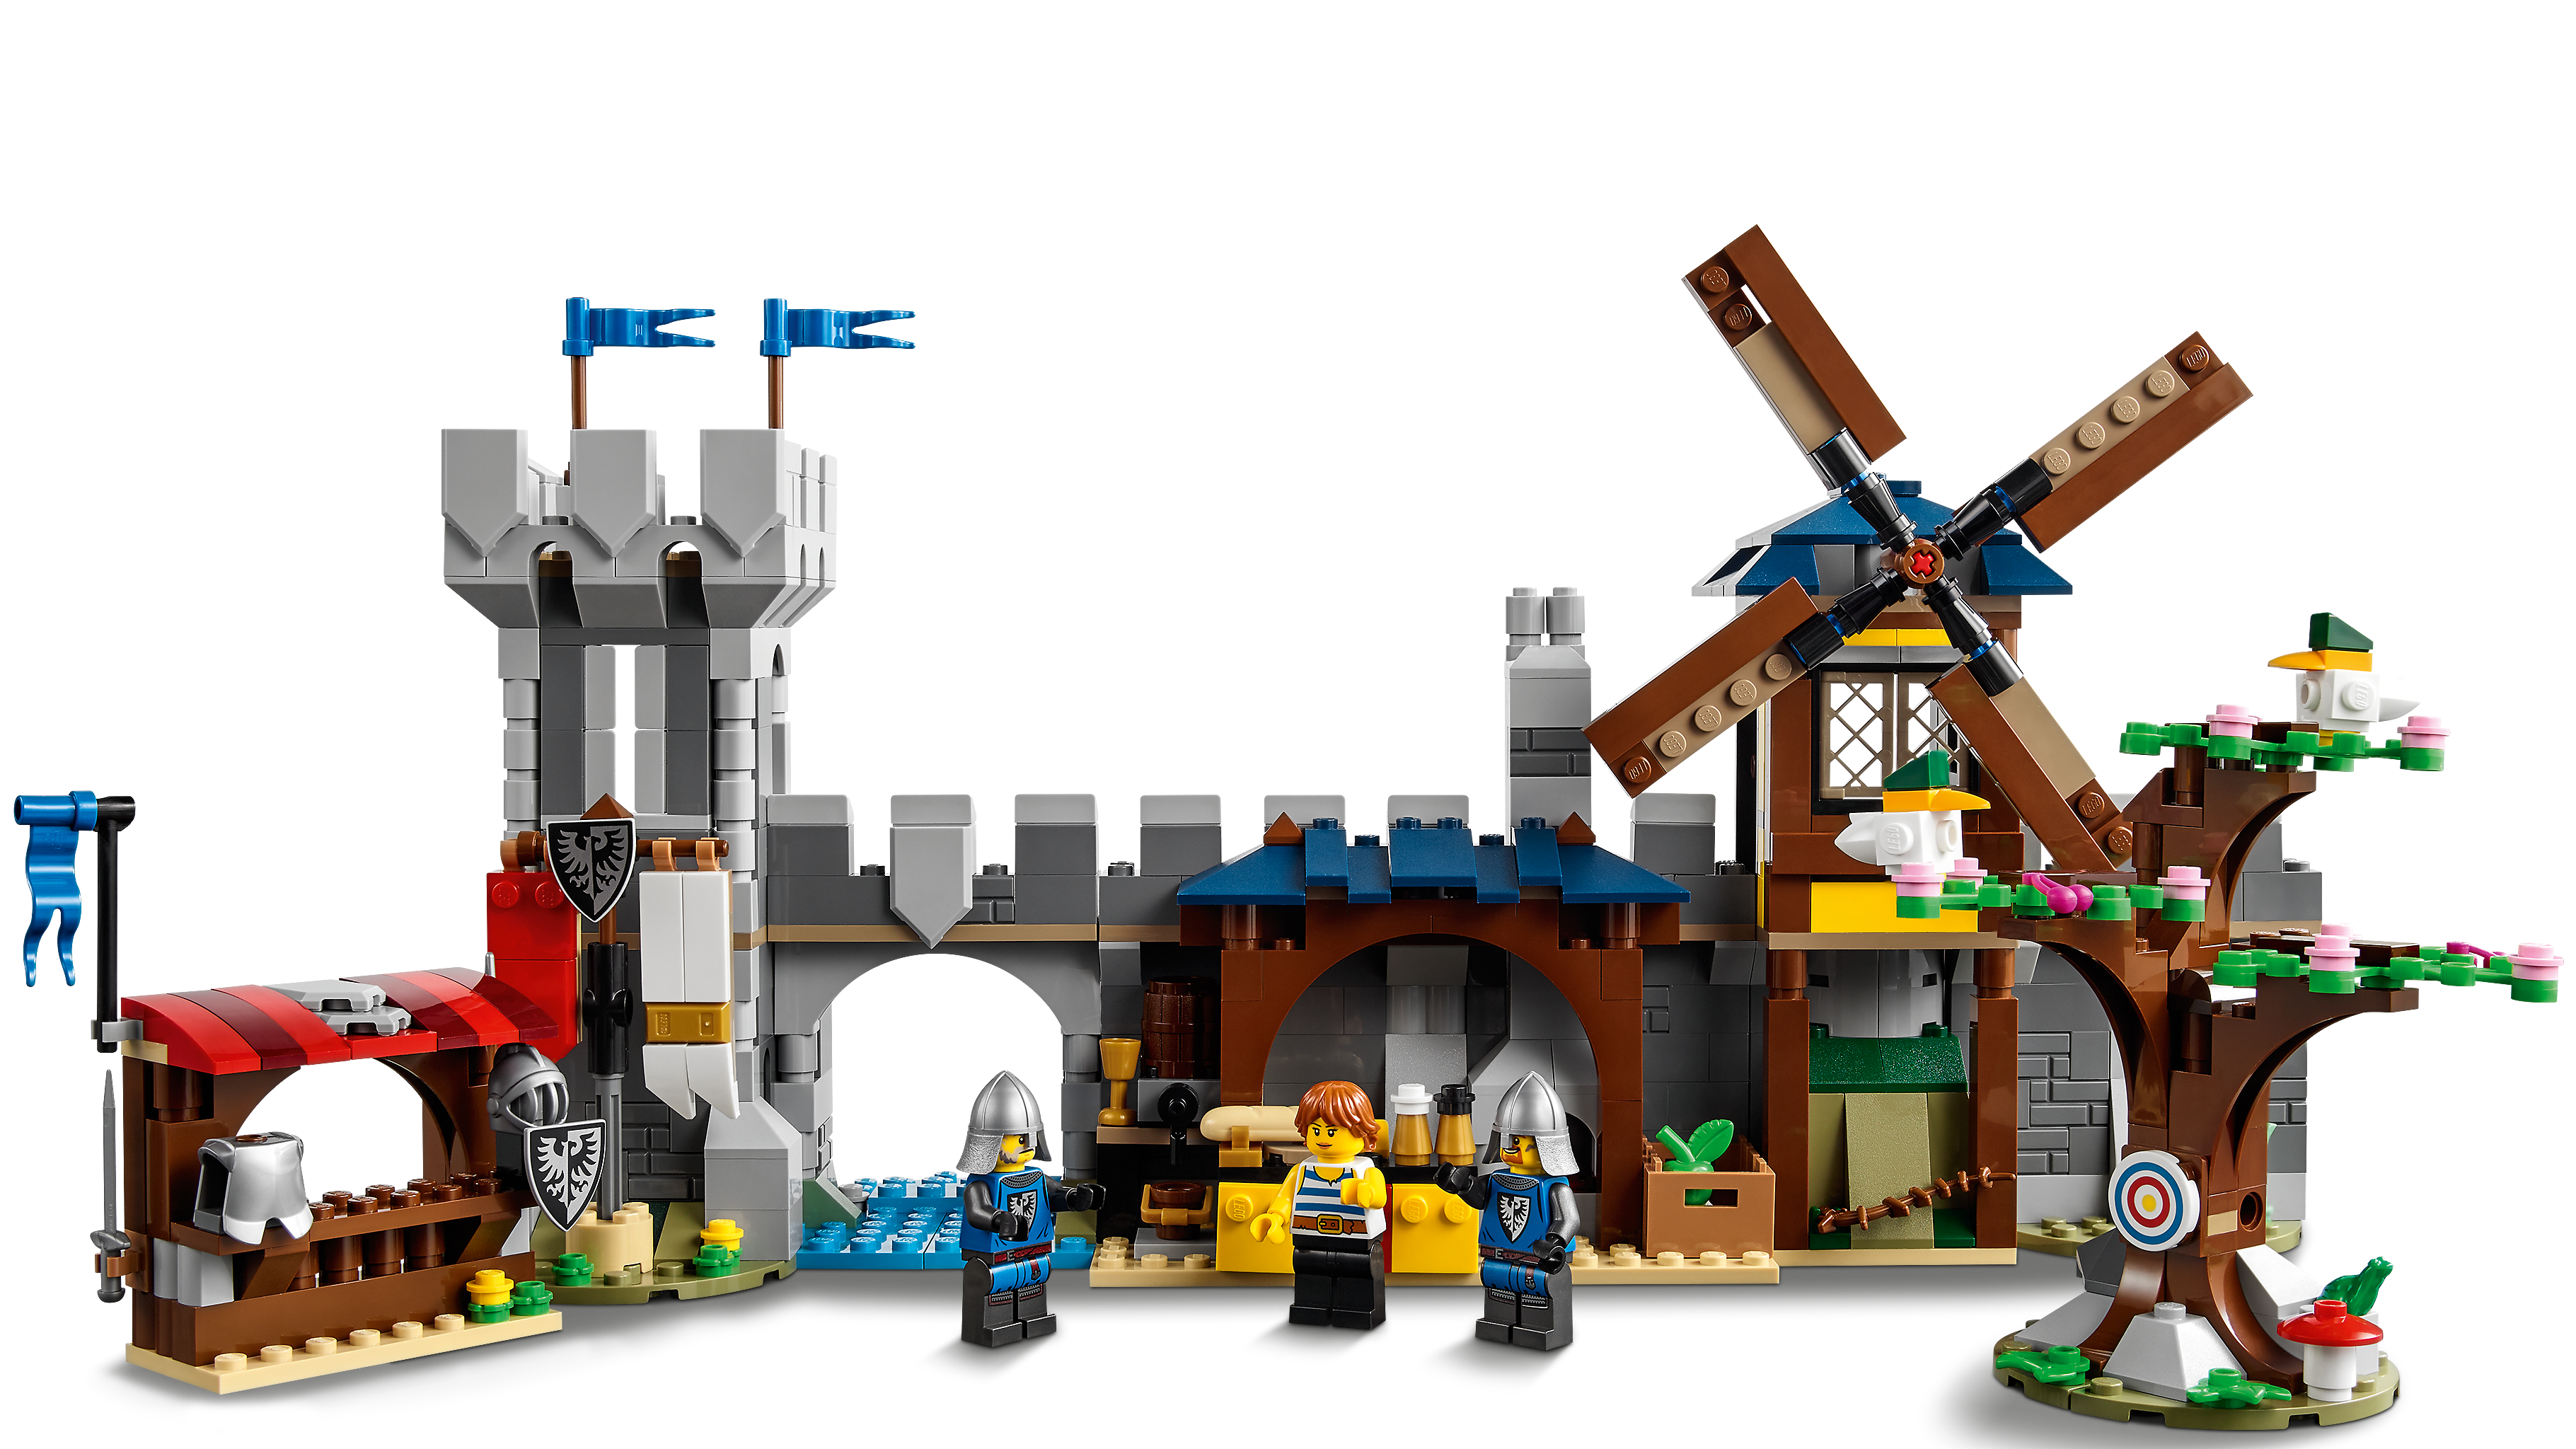 Medieval Castle 31120 | Creator 3-in-1 | Buy online at the